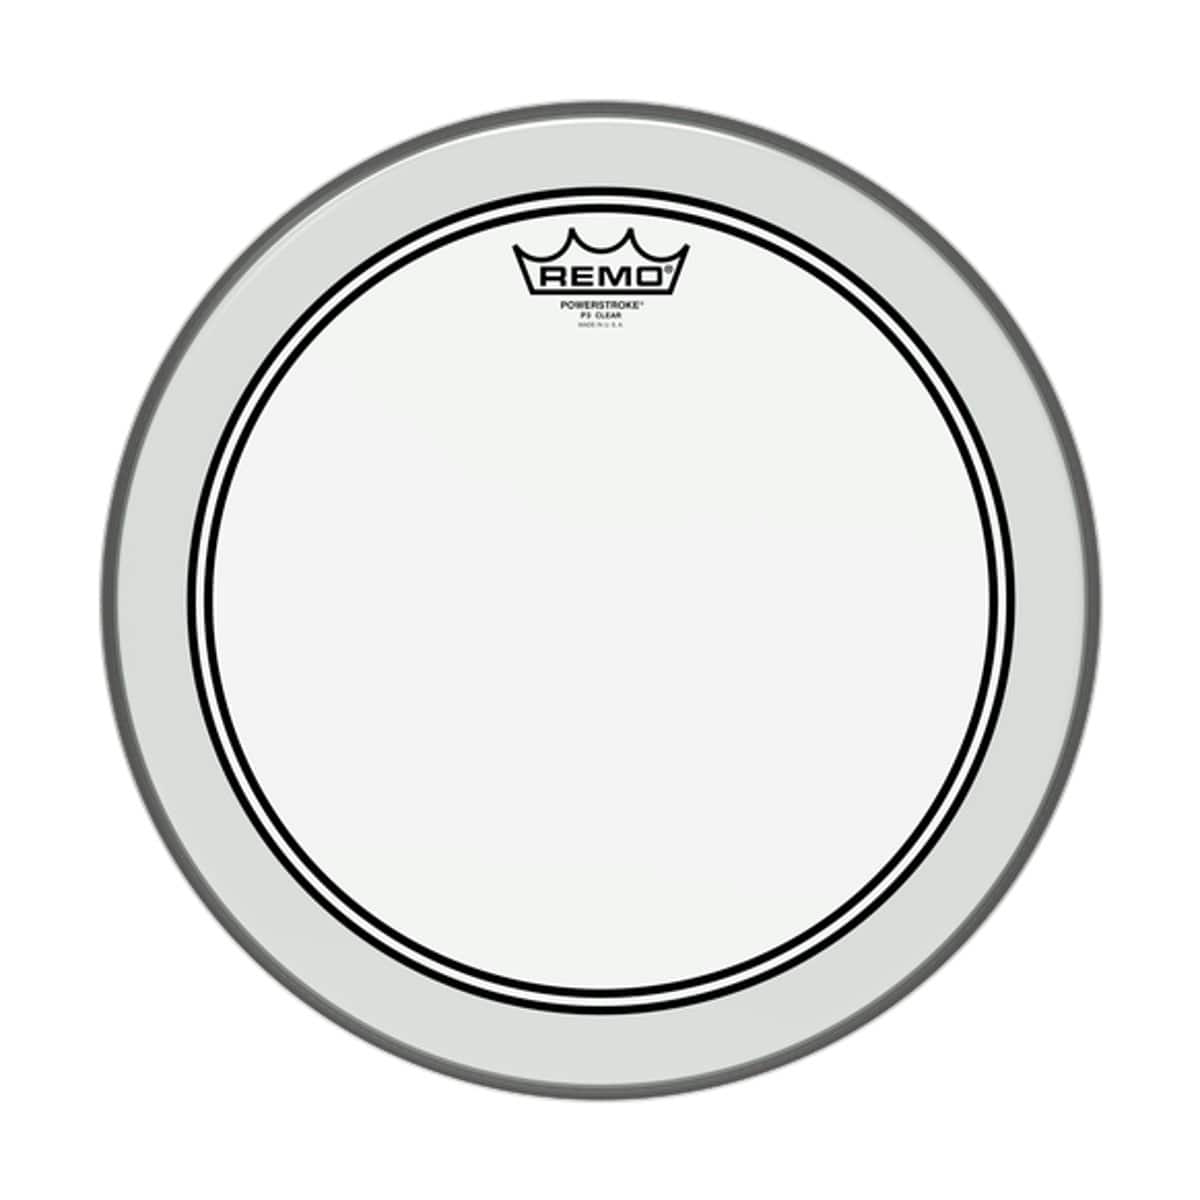 Remo Percussion Remo 13 Inch Drum Head Powerstroke 3 Clear P3-0313-BP - Byron Music